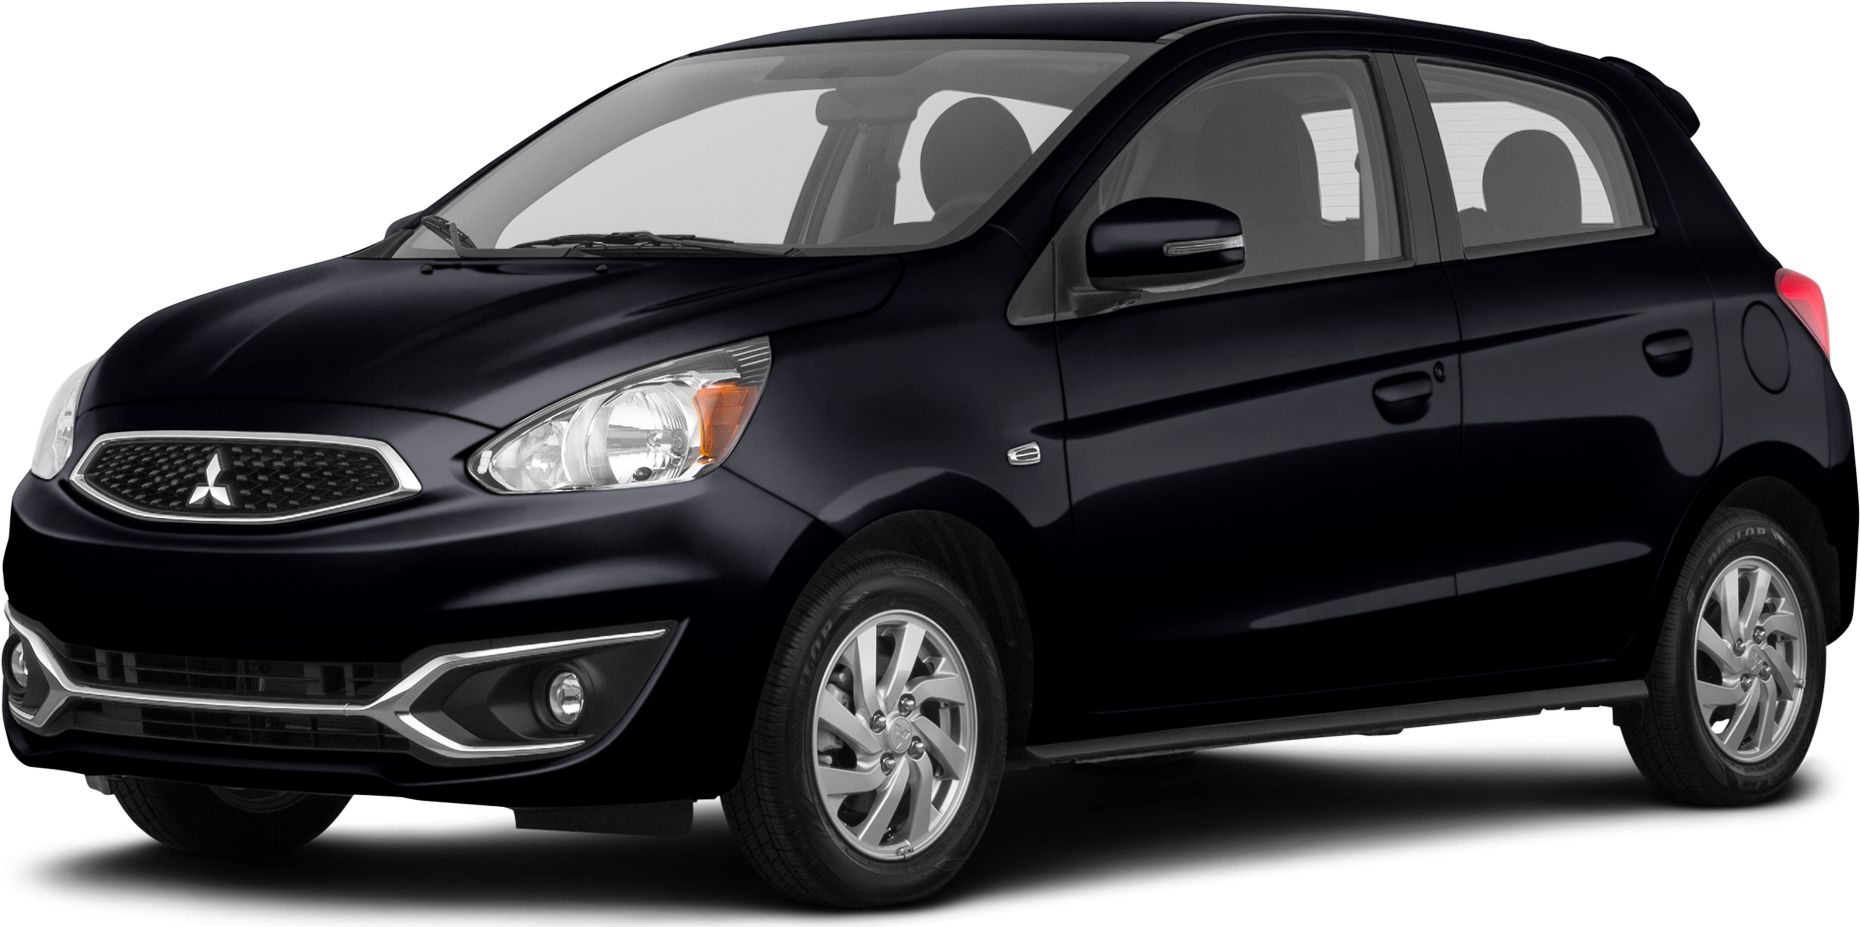 2020 Mitsubishi Mirage Review Pricing and Specs